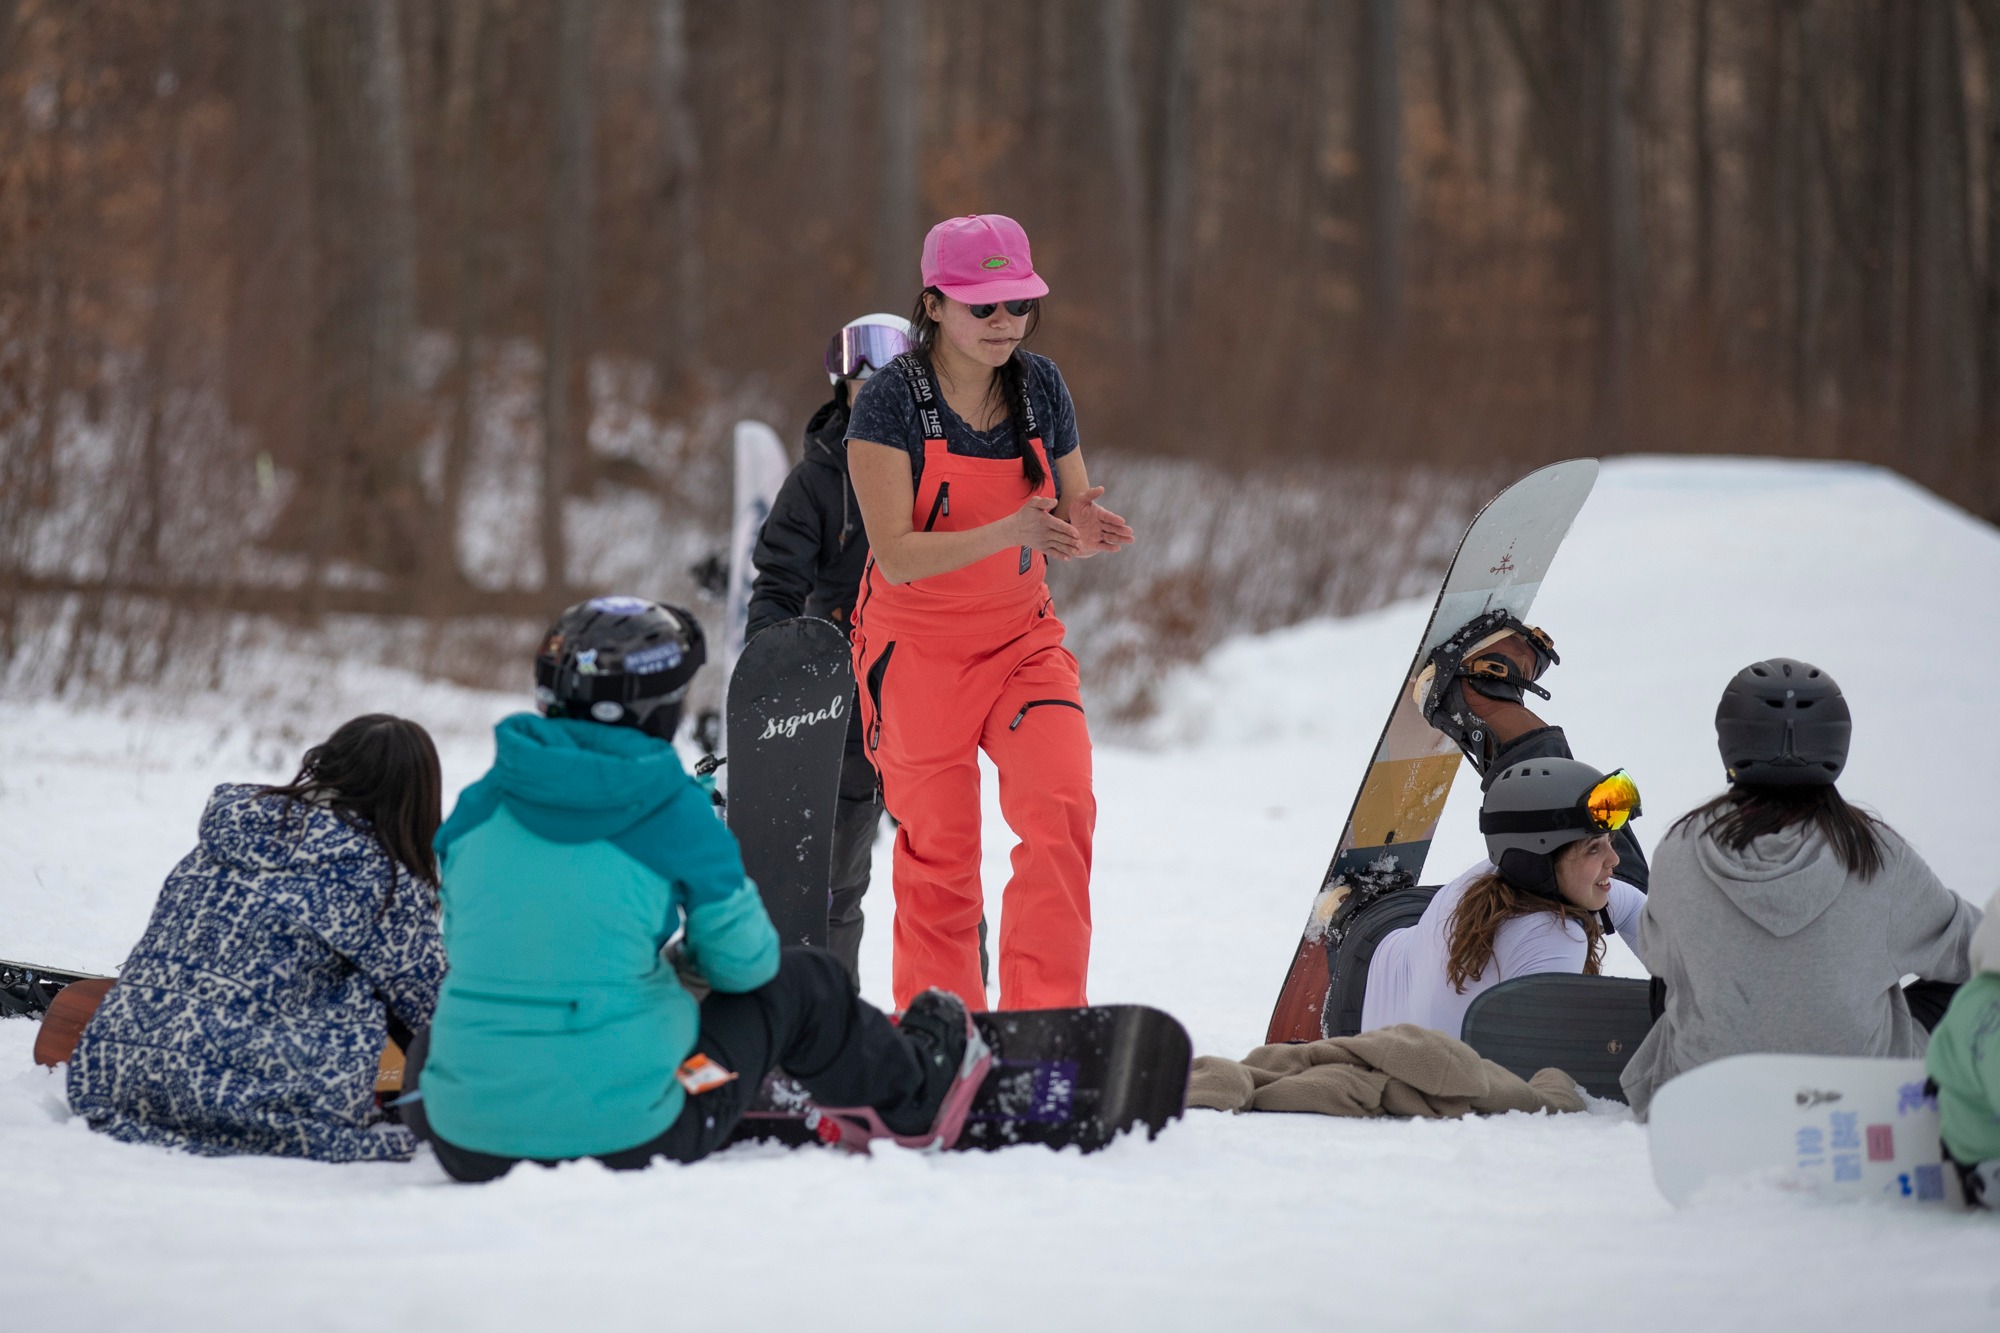 Alice Gong coaches at BTBounds Women's Snowboard Camp at Mountain Creek